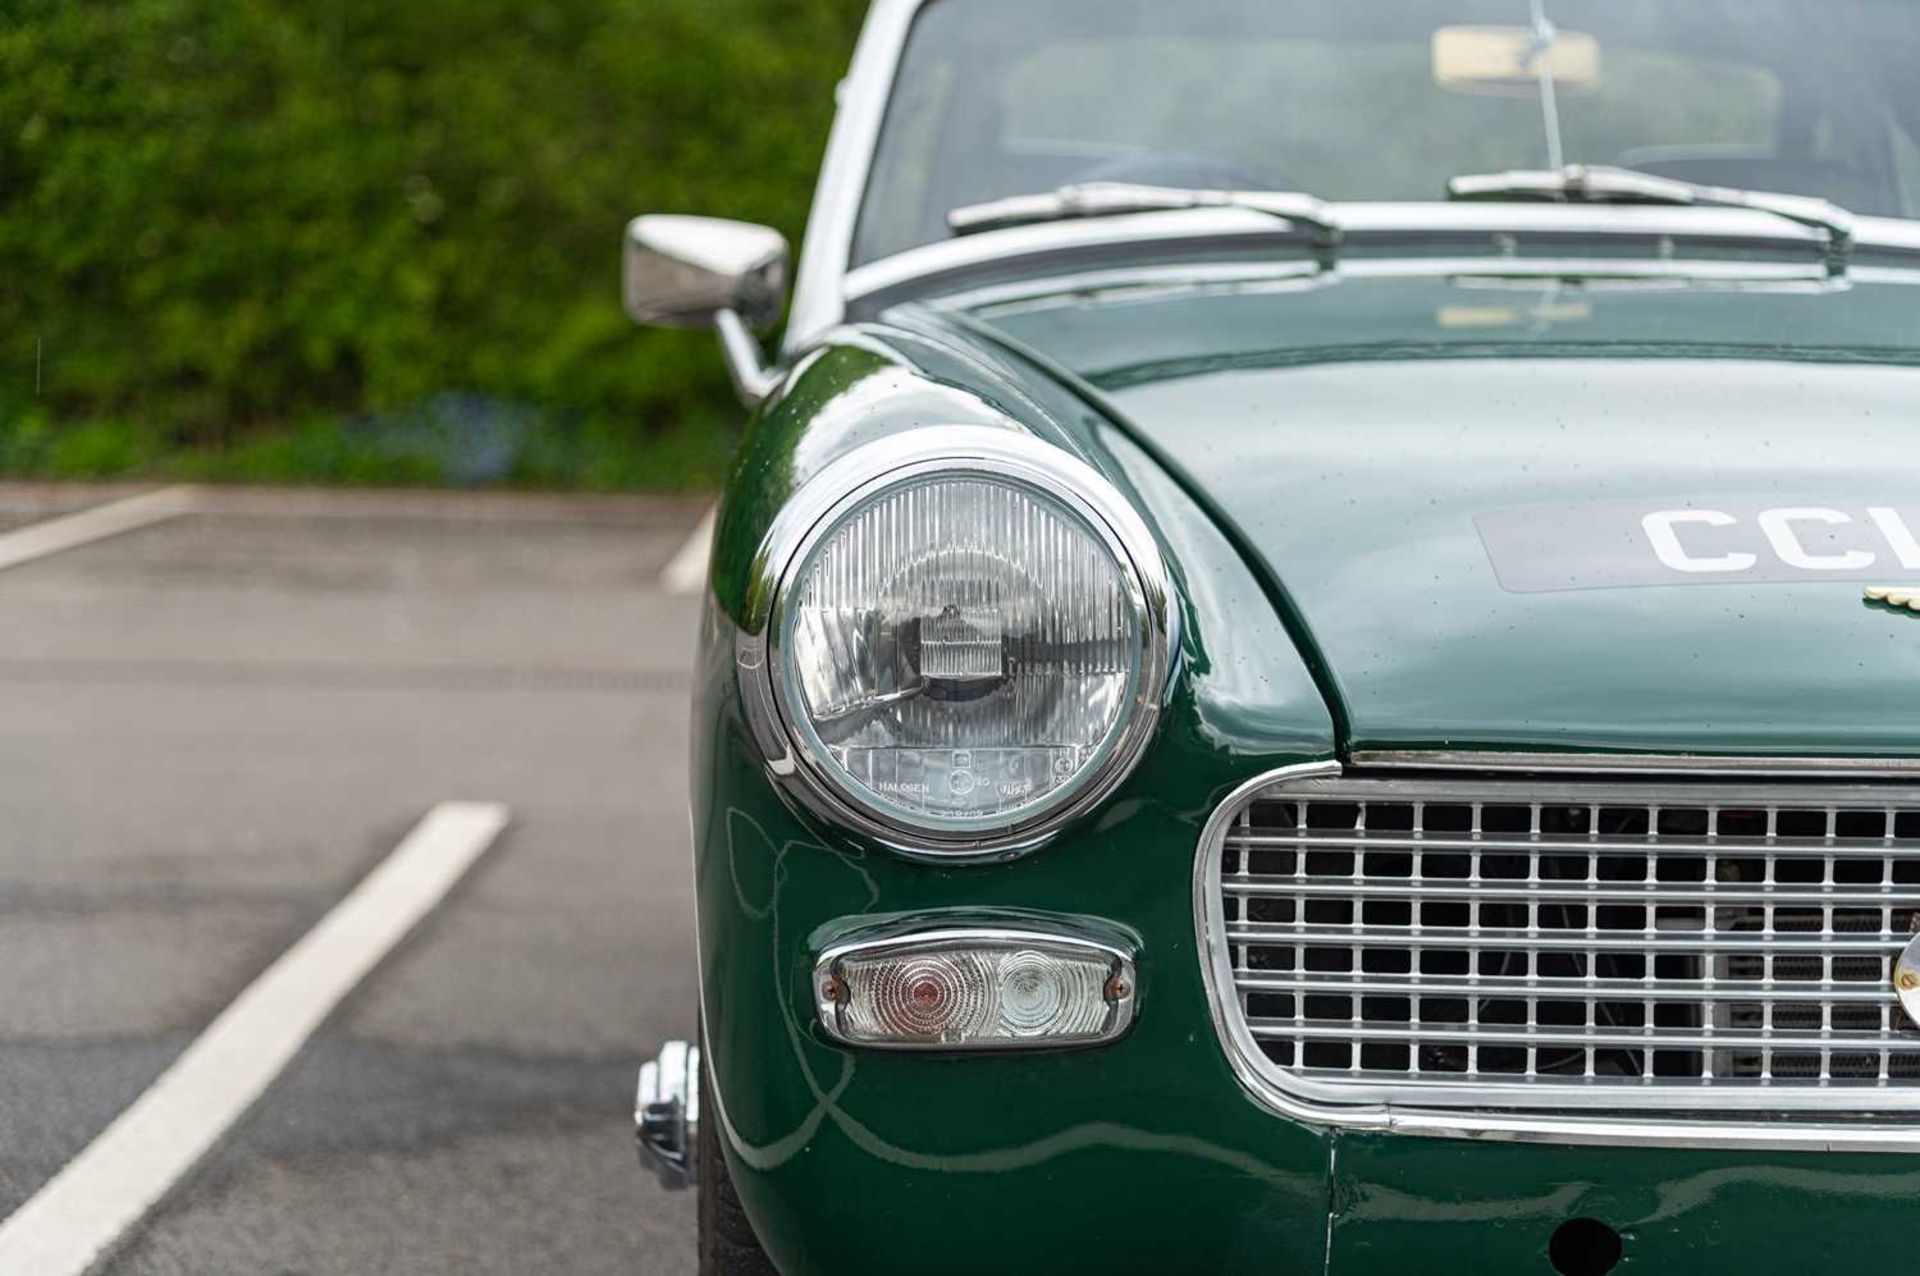 1965 Austin-Healey Sprite Formerly the property of British Formula One racing driver David Piper - Image 30 of 71